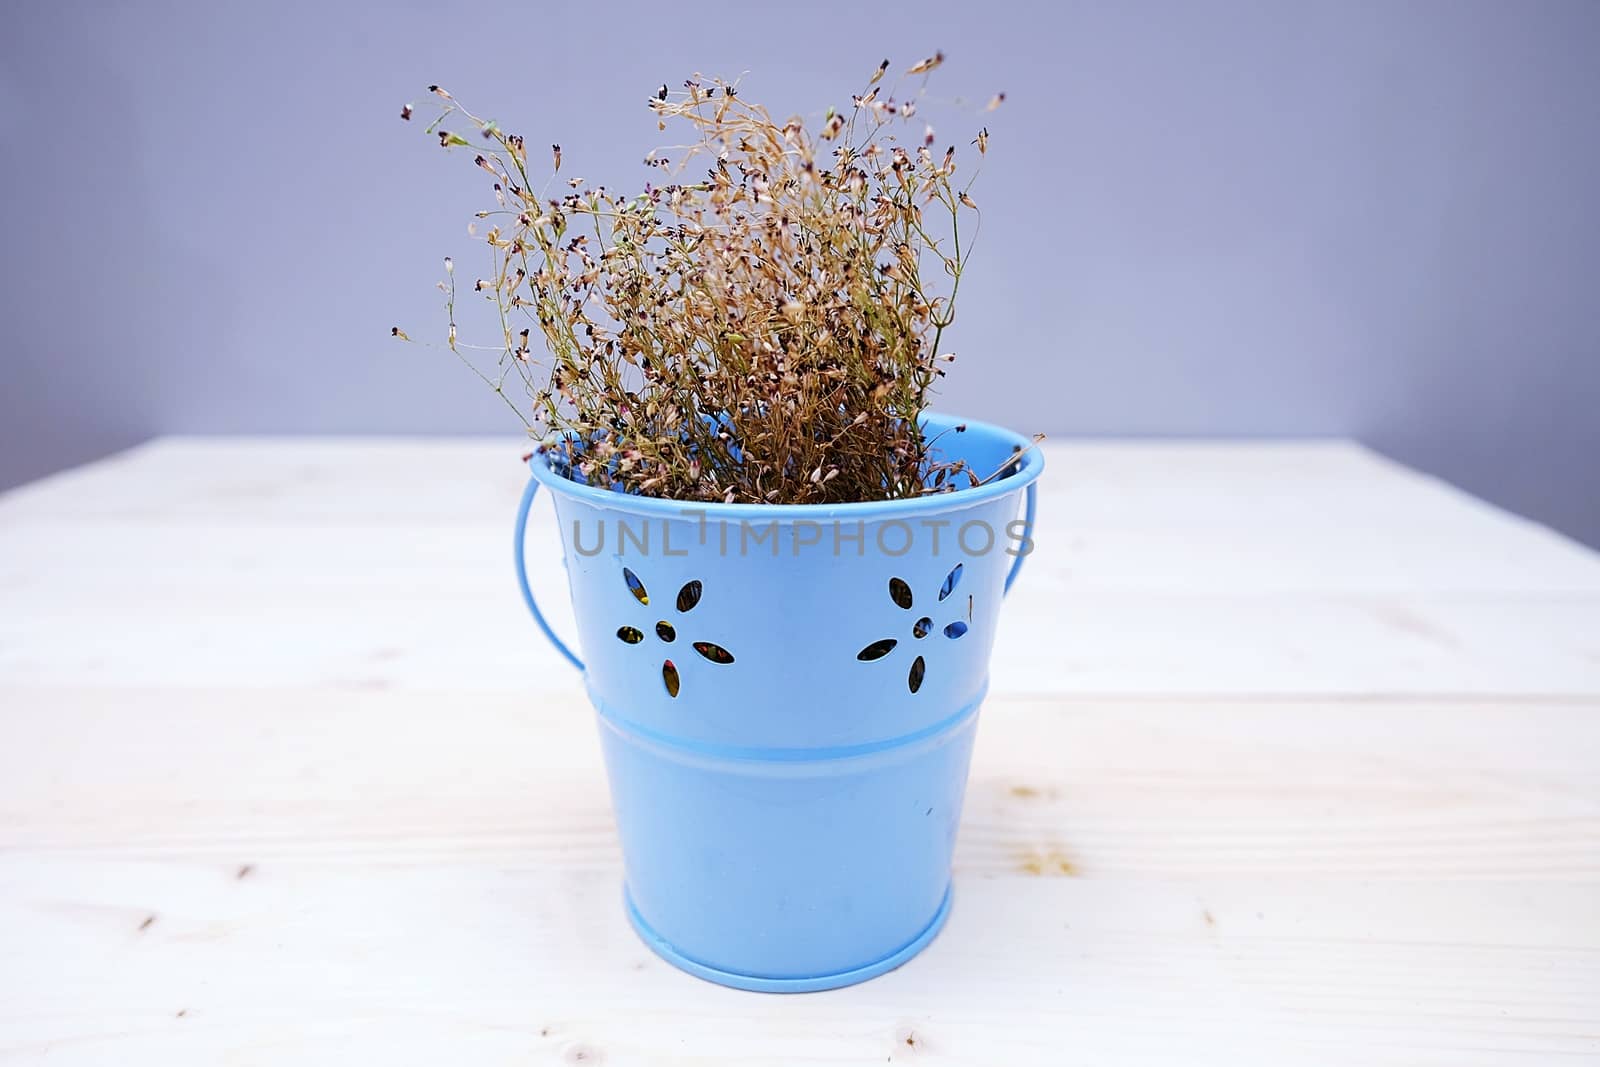 Dry Baby's Breath Flower in The Blue Pot by aonip